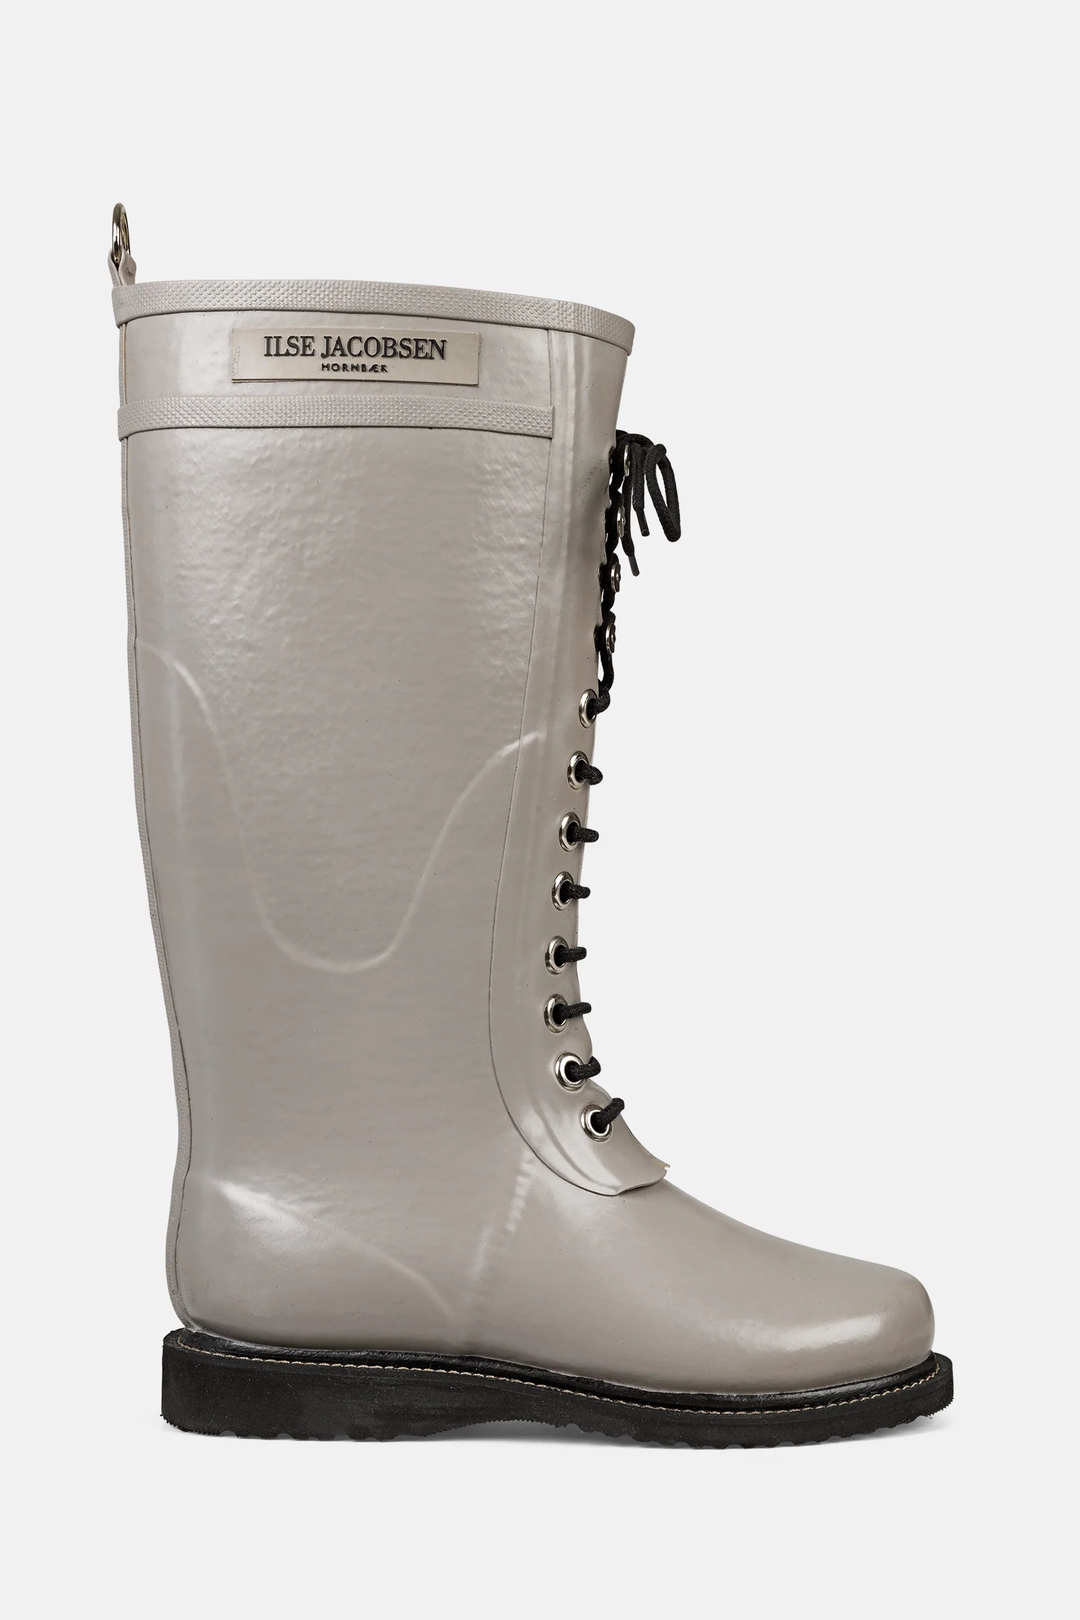 Ilse Jacobsen - Knee High Rubber Boots in Atmosphere